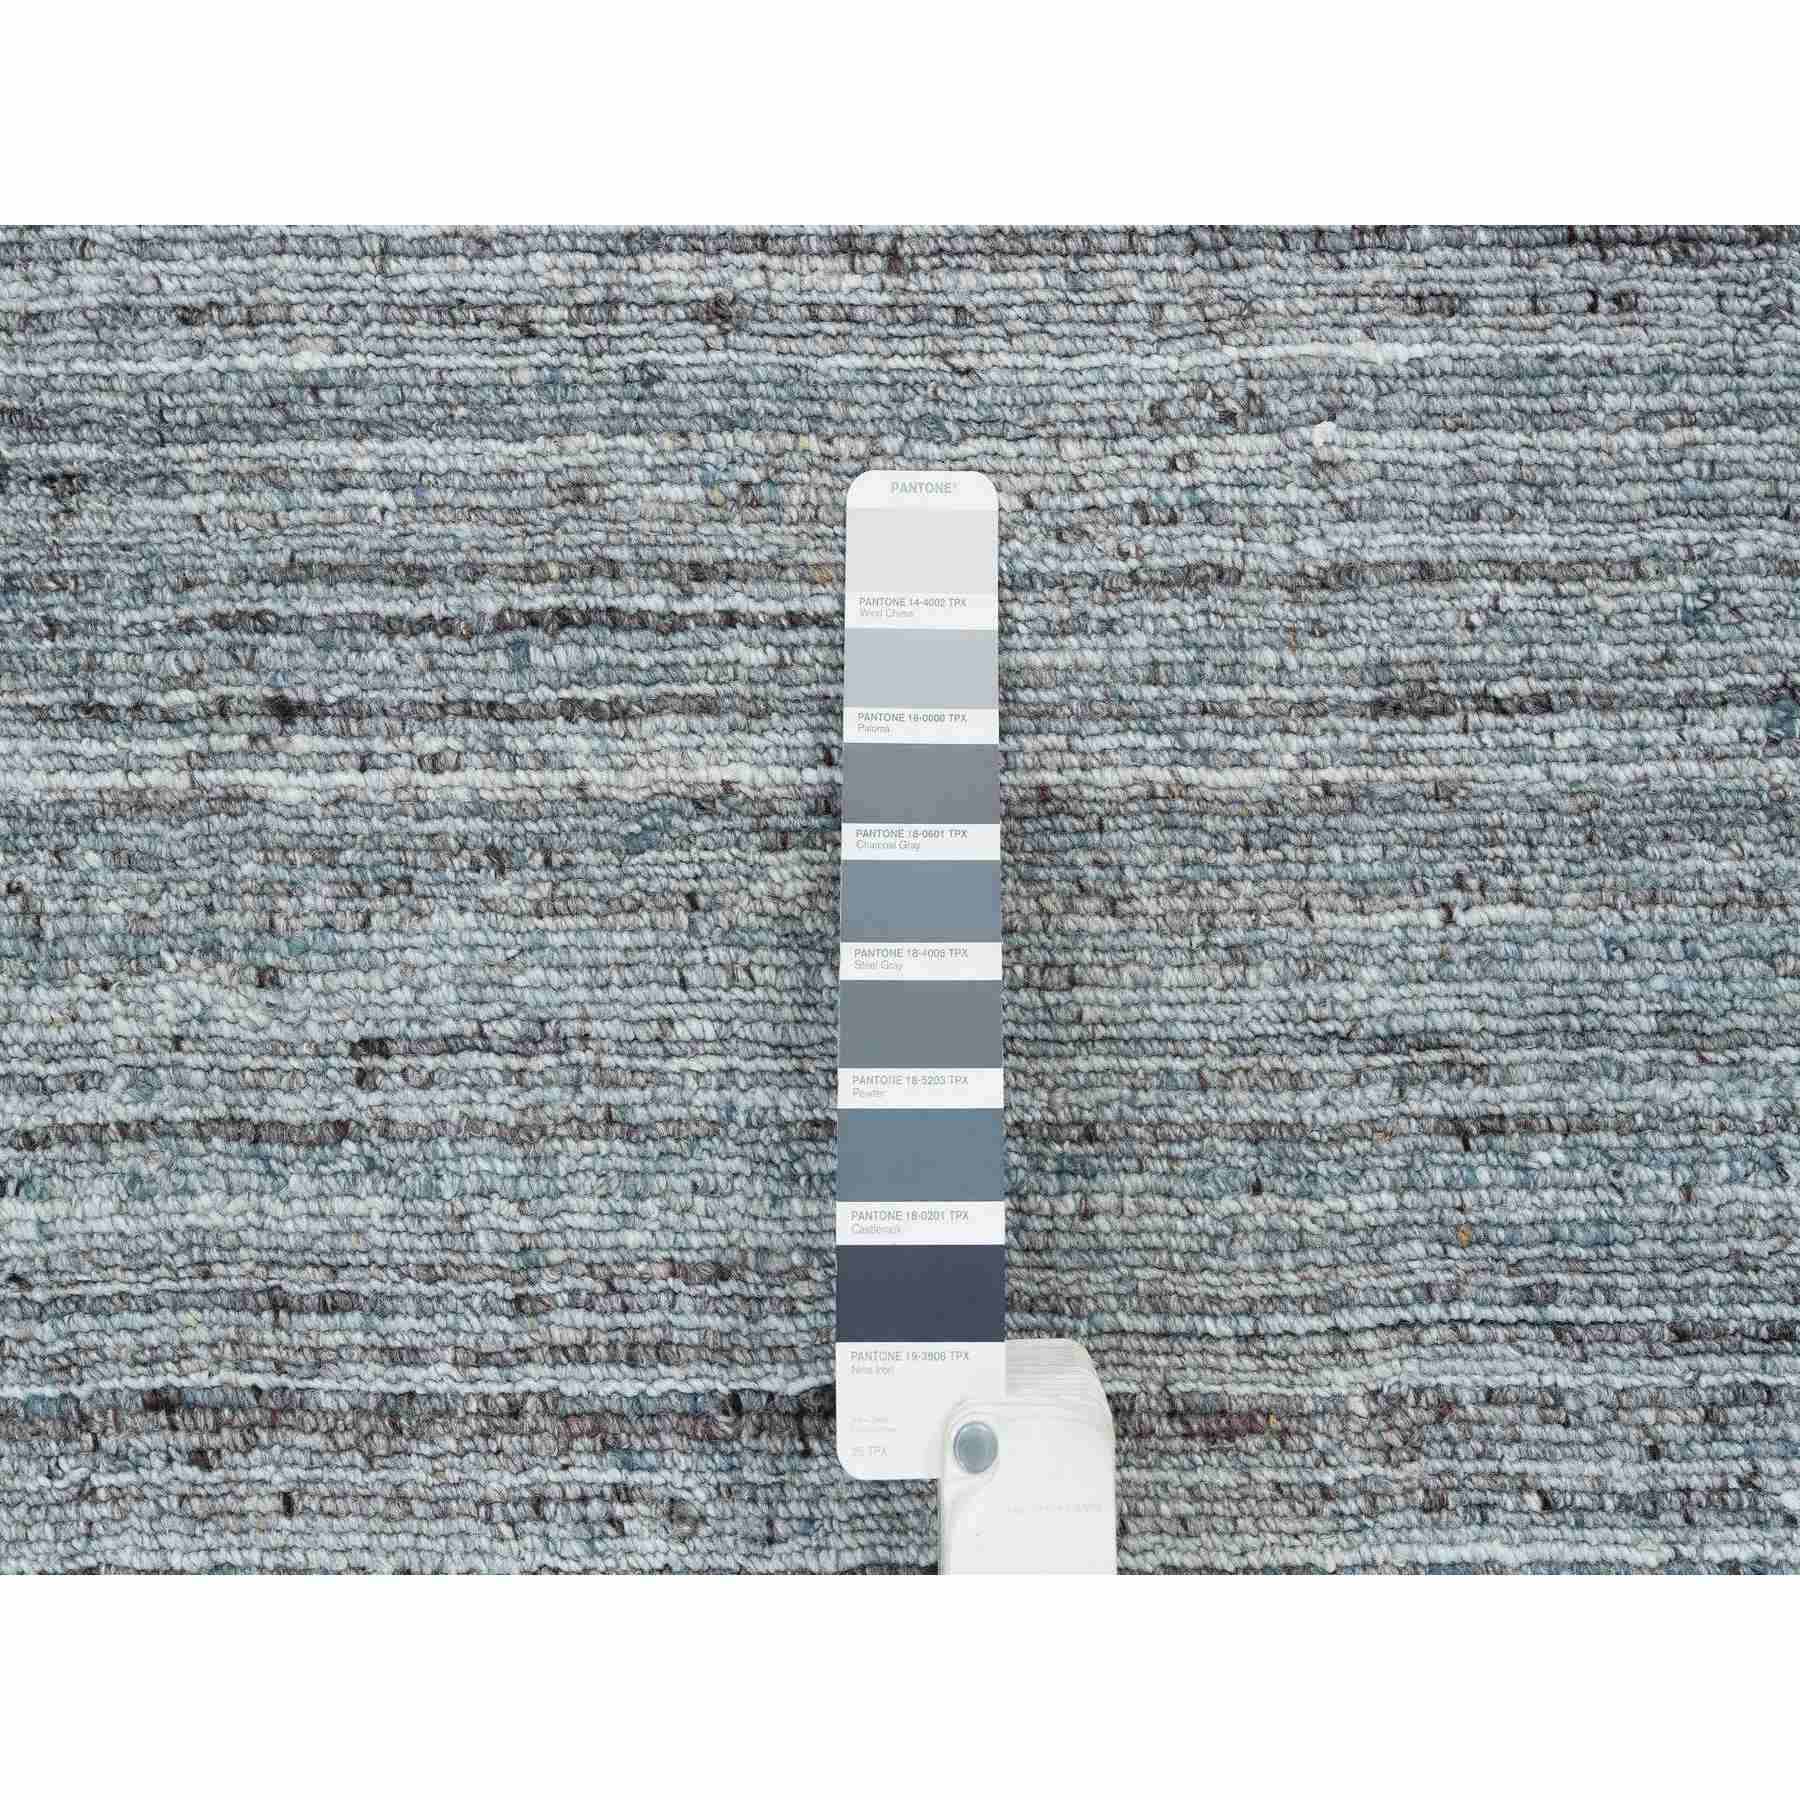 Modern-and-Contemporary-Hand-Loomed-Rug-327780